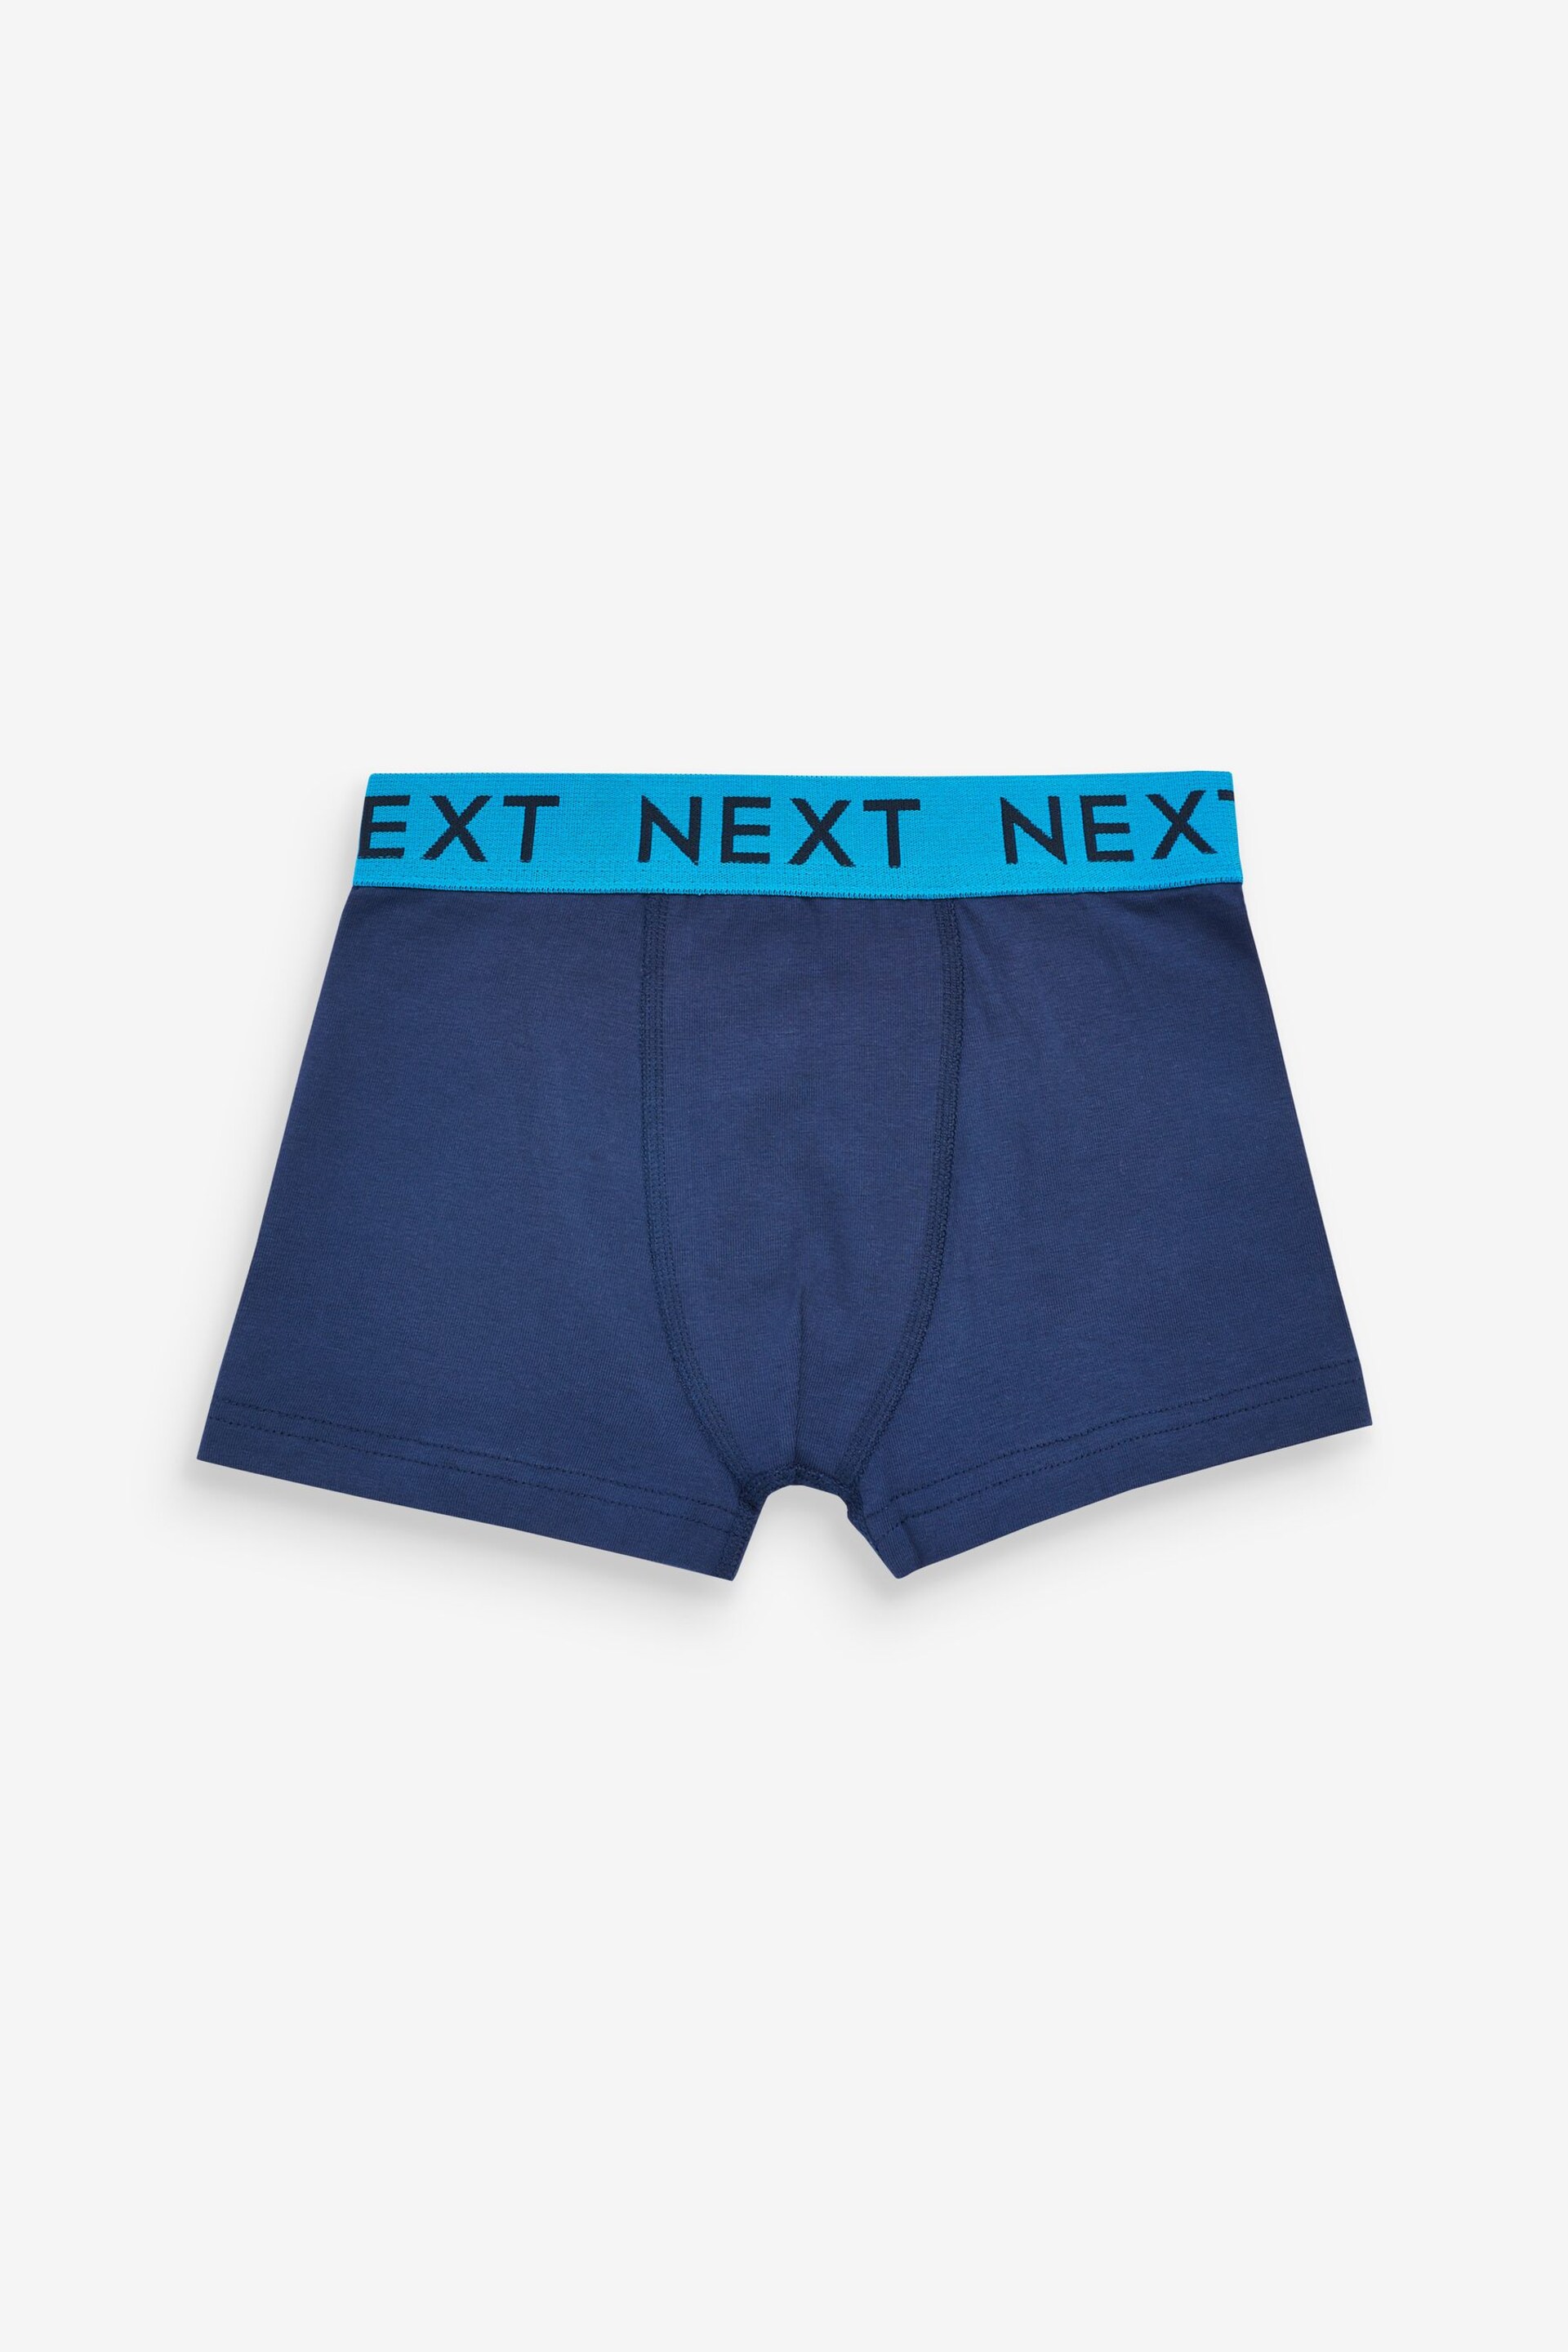 Navy Bright Waistband Trunks 10 Pack (1.5-16yrs) - Image 6 of 11